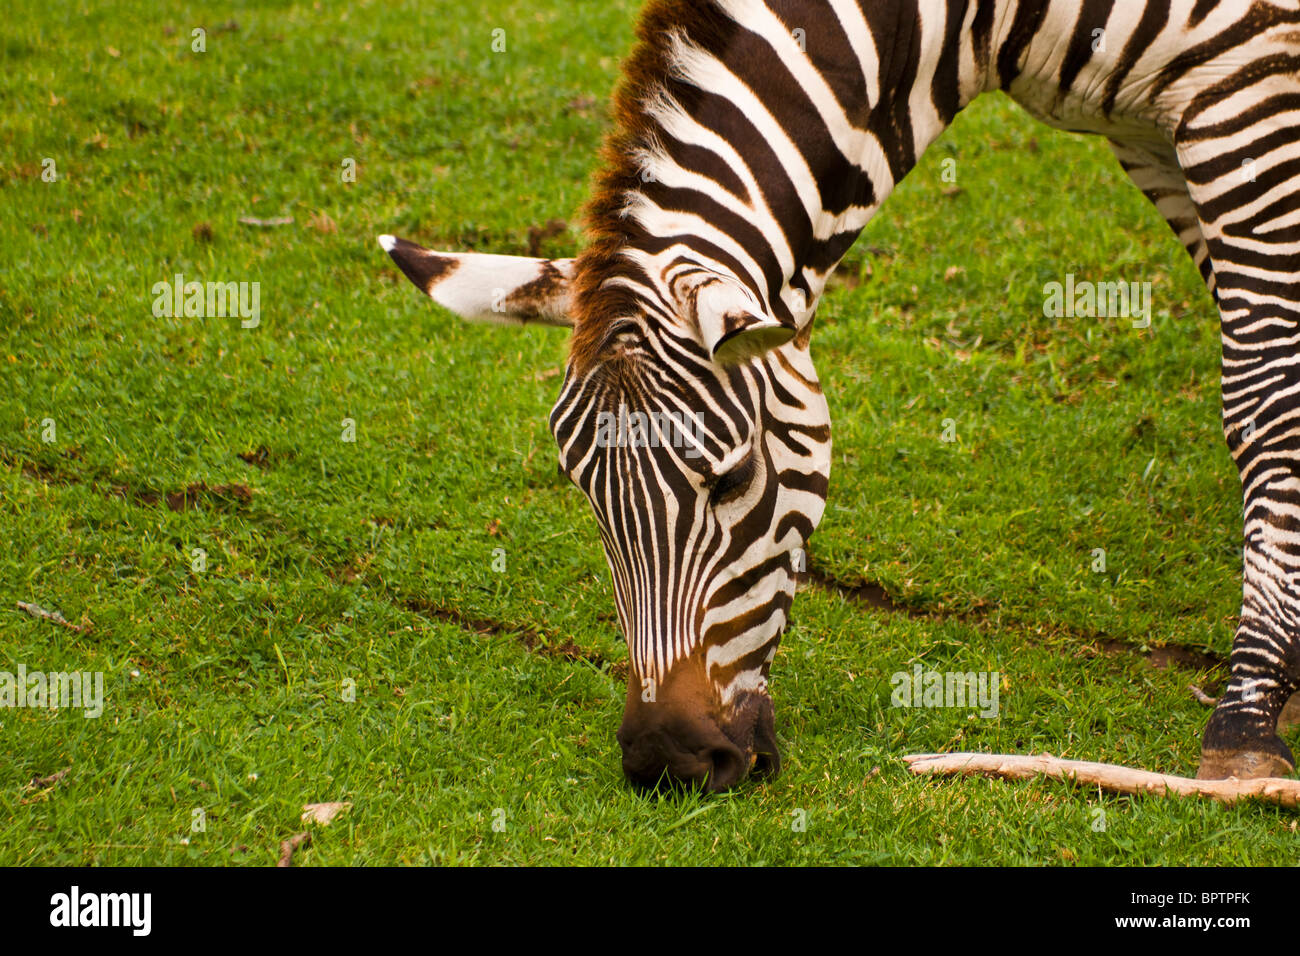 Zebras are African equids best known for their distinctive black and white stripes. Stock Photo